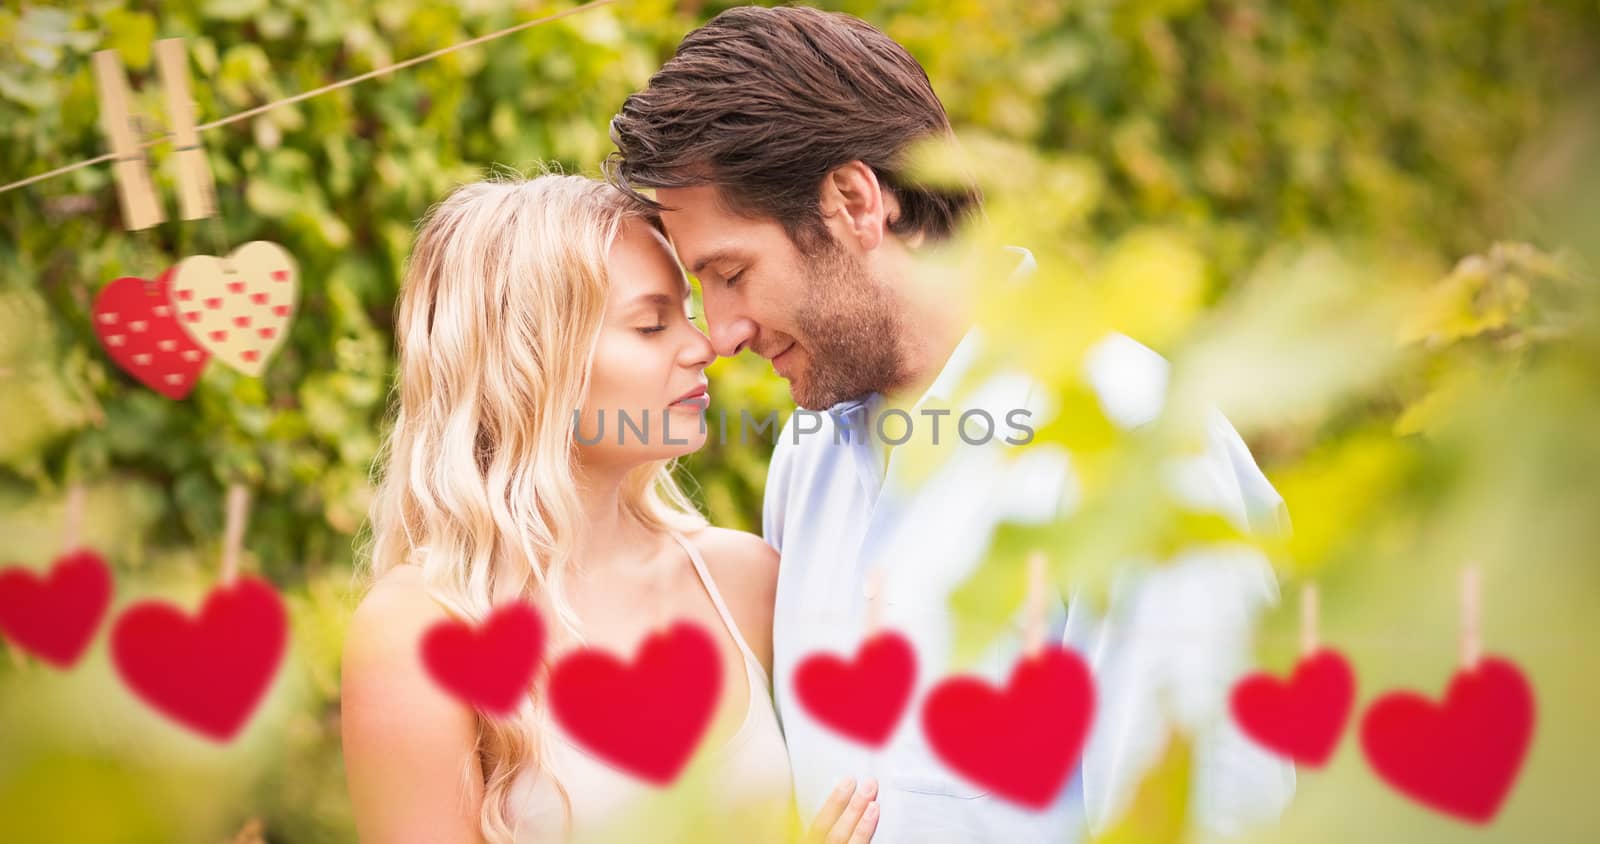 Young romantic couple embracing each other against hearts hanging on a line